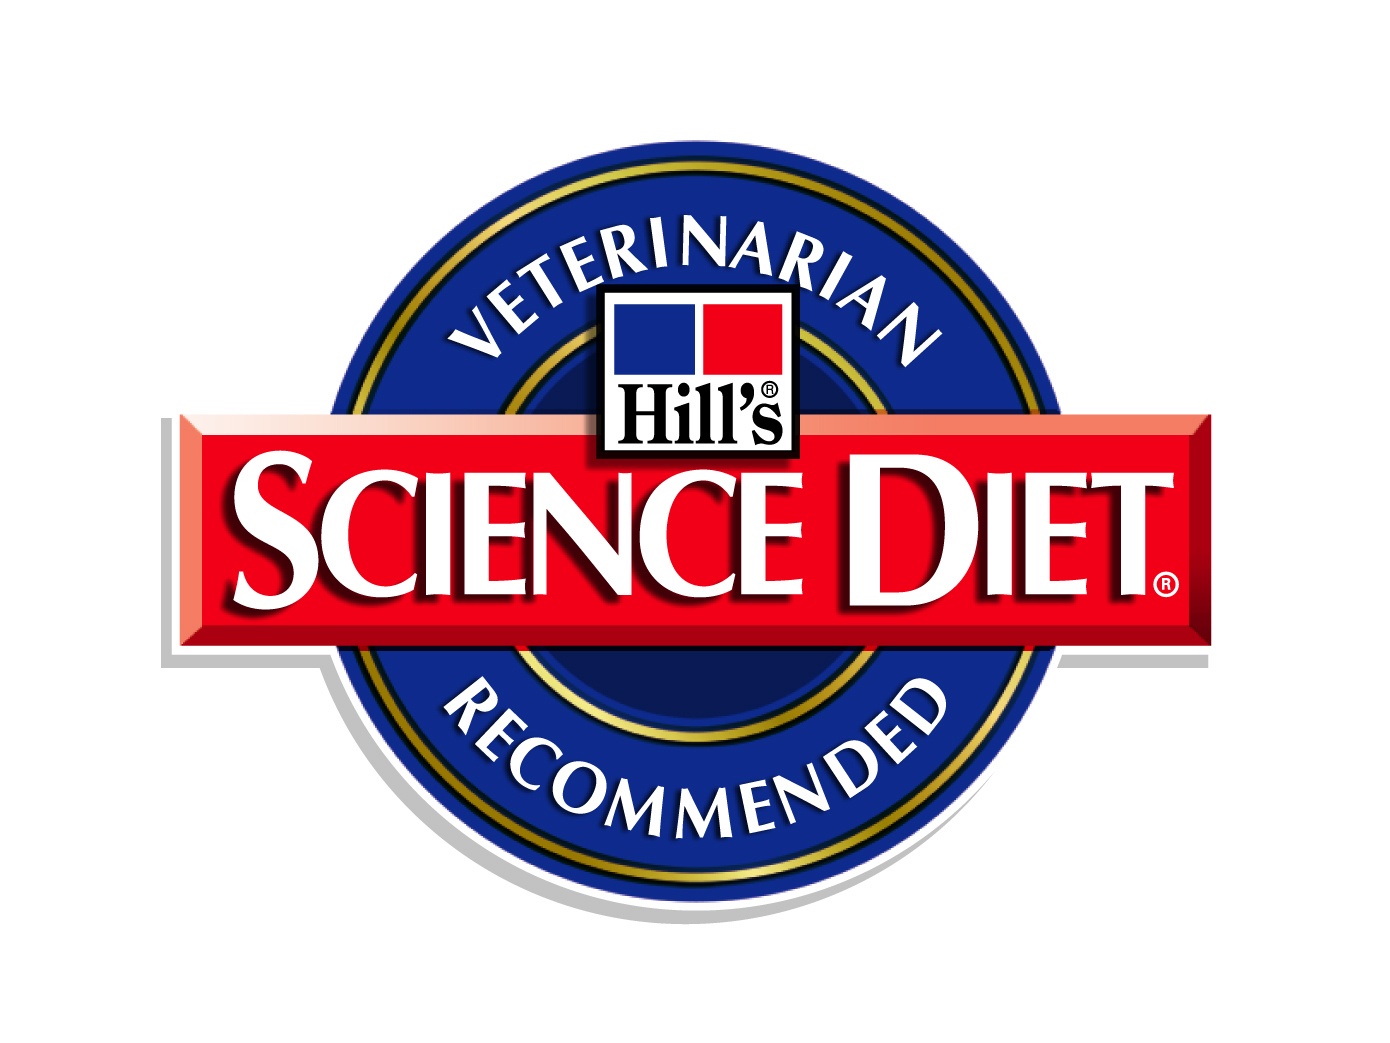 January 2019Science Diet Coupons | 2019 Printable Coupons For - Free Printable Science Diet Dog Food Coupons